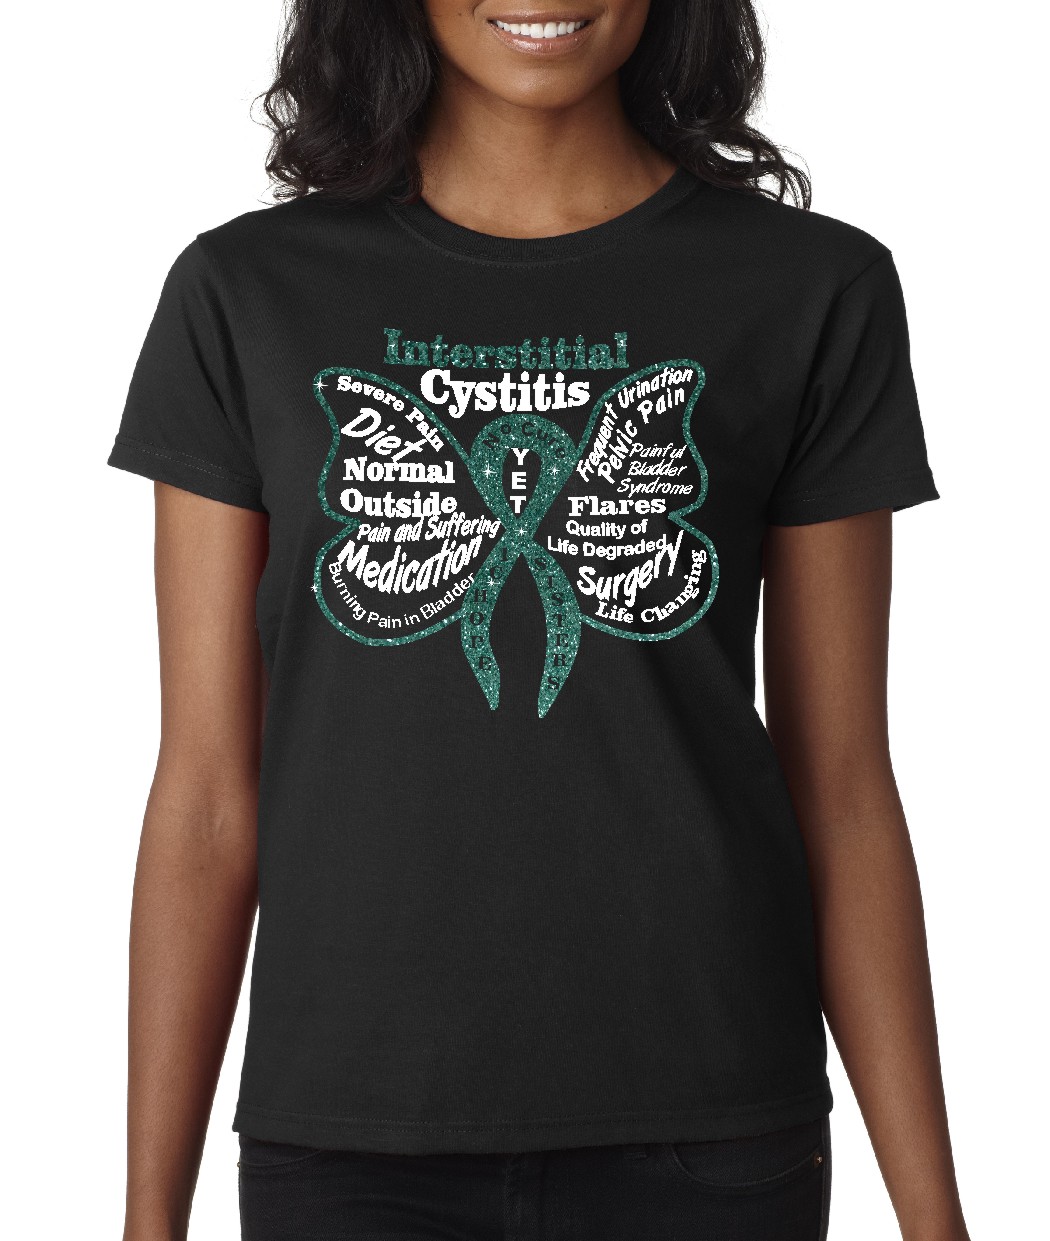 Interstitial Cystitis on black with glitterflake - ladies ss shirt